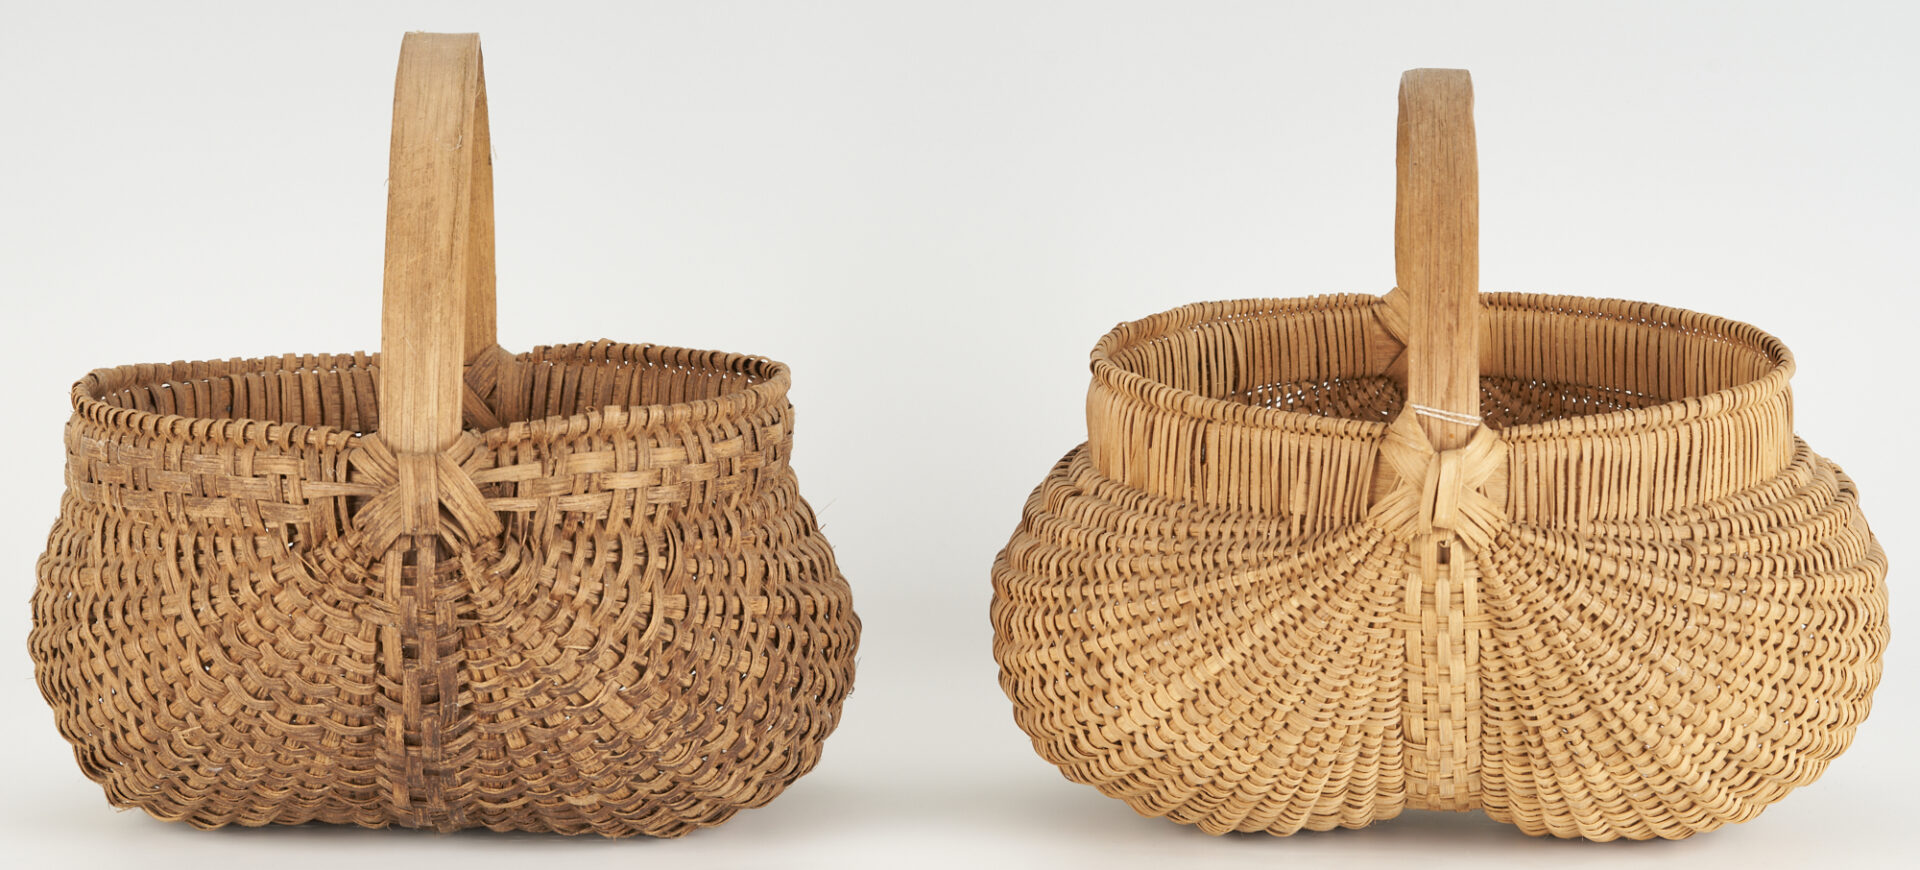 Lot 186: 2 Signed Cannon Co. TN Baskets by Davis, Hibdon and Haley